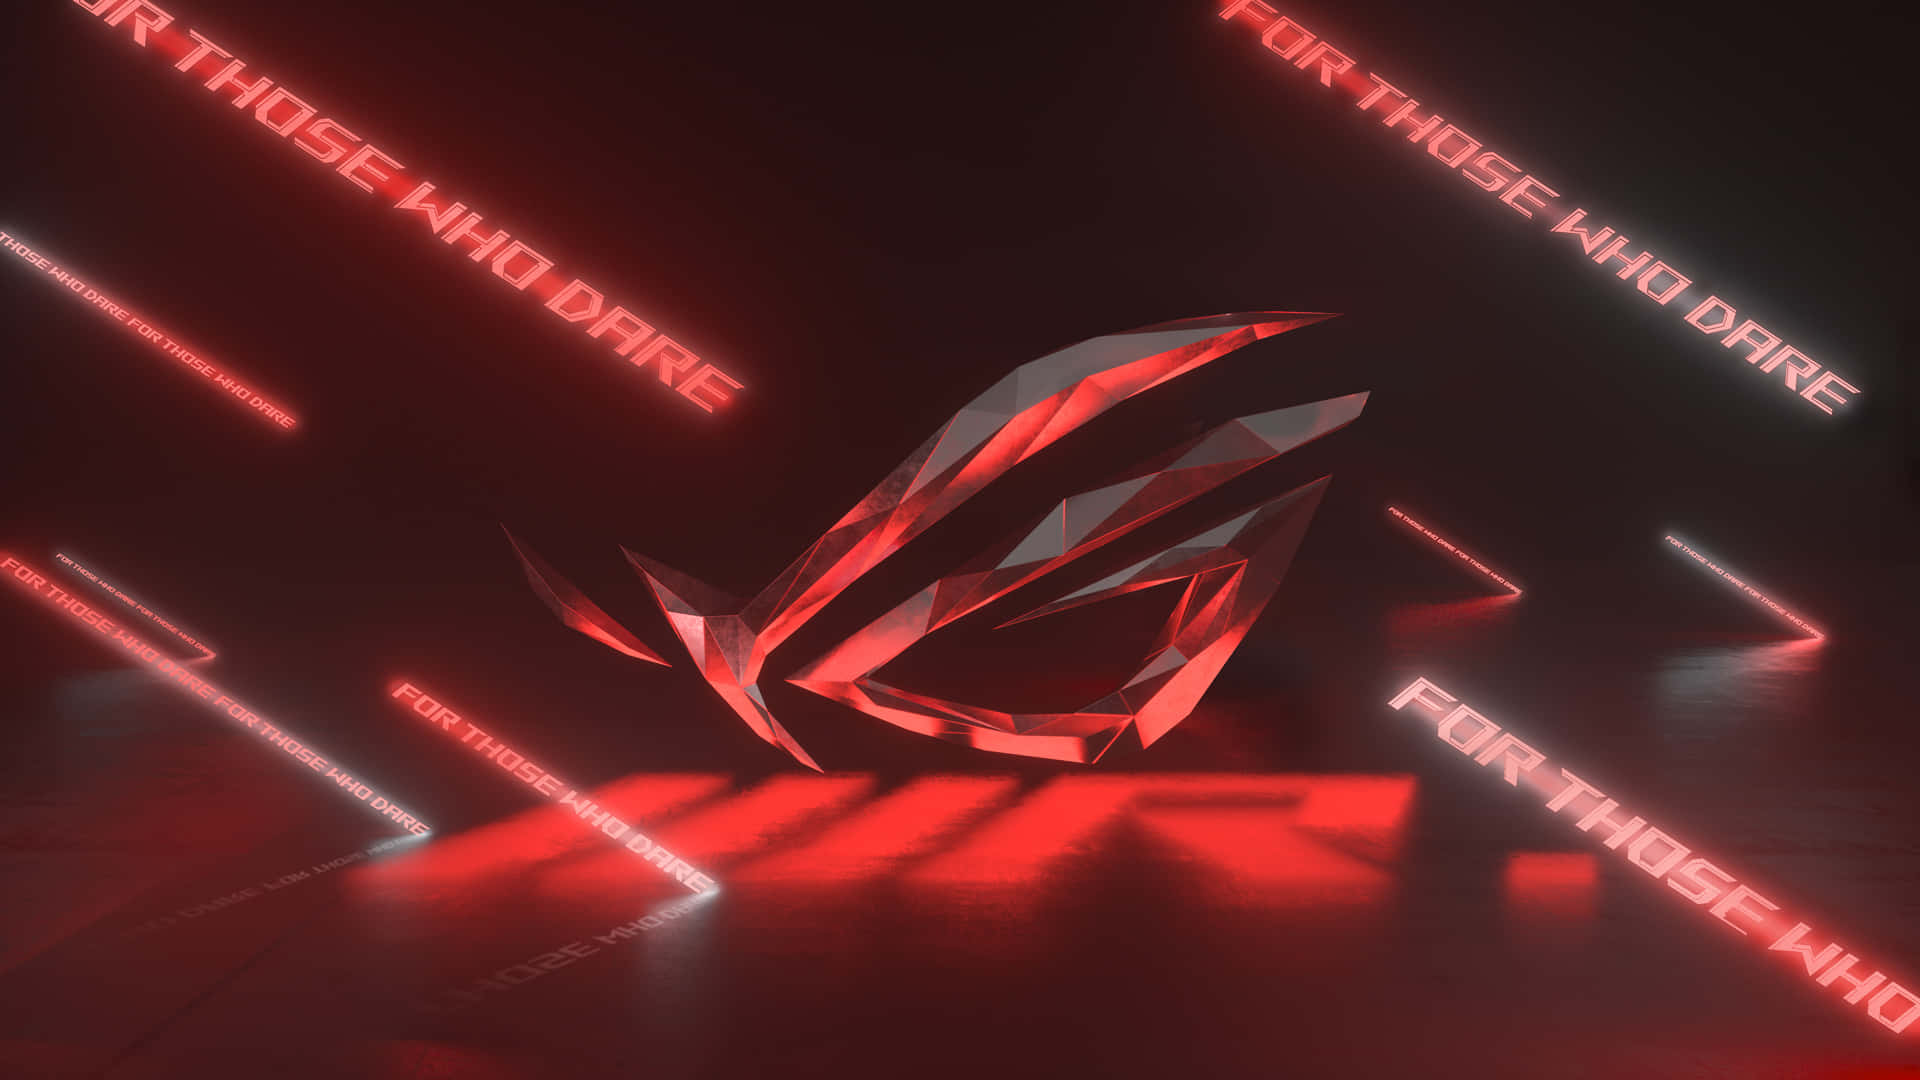 Experience the Power of ROG Gaming